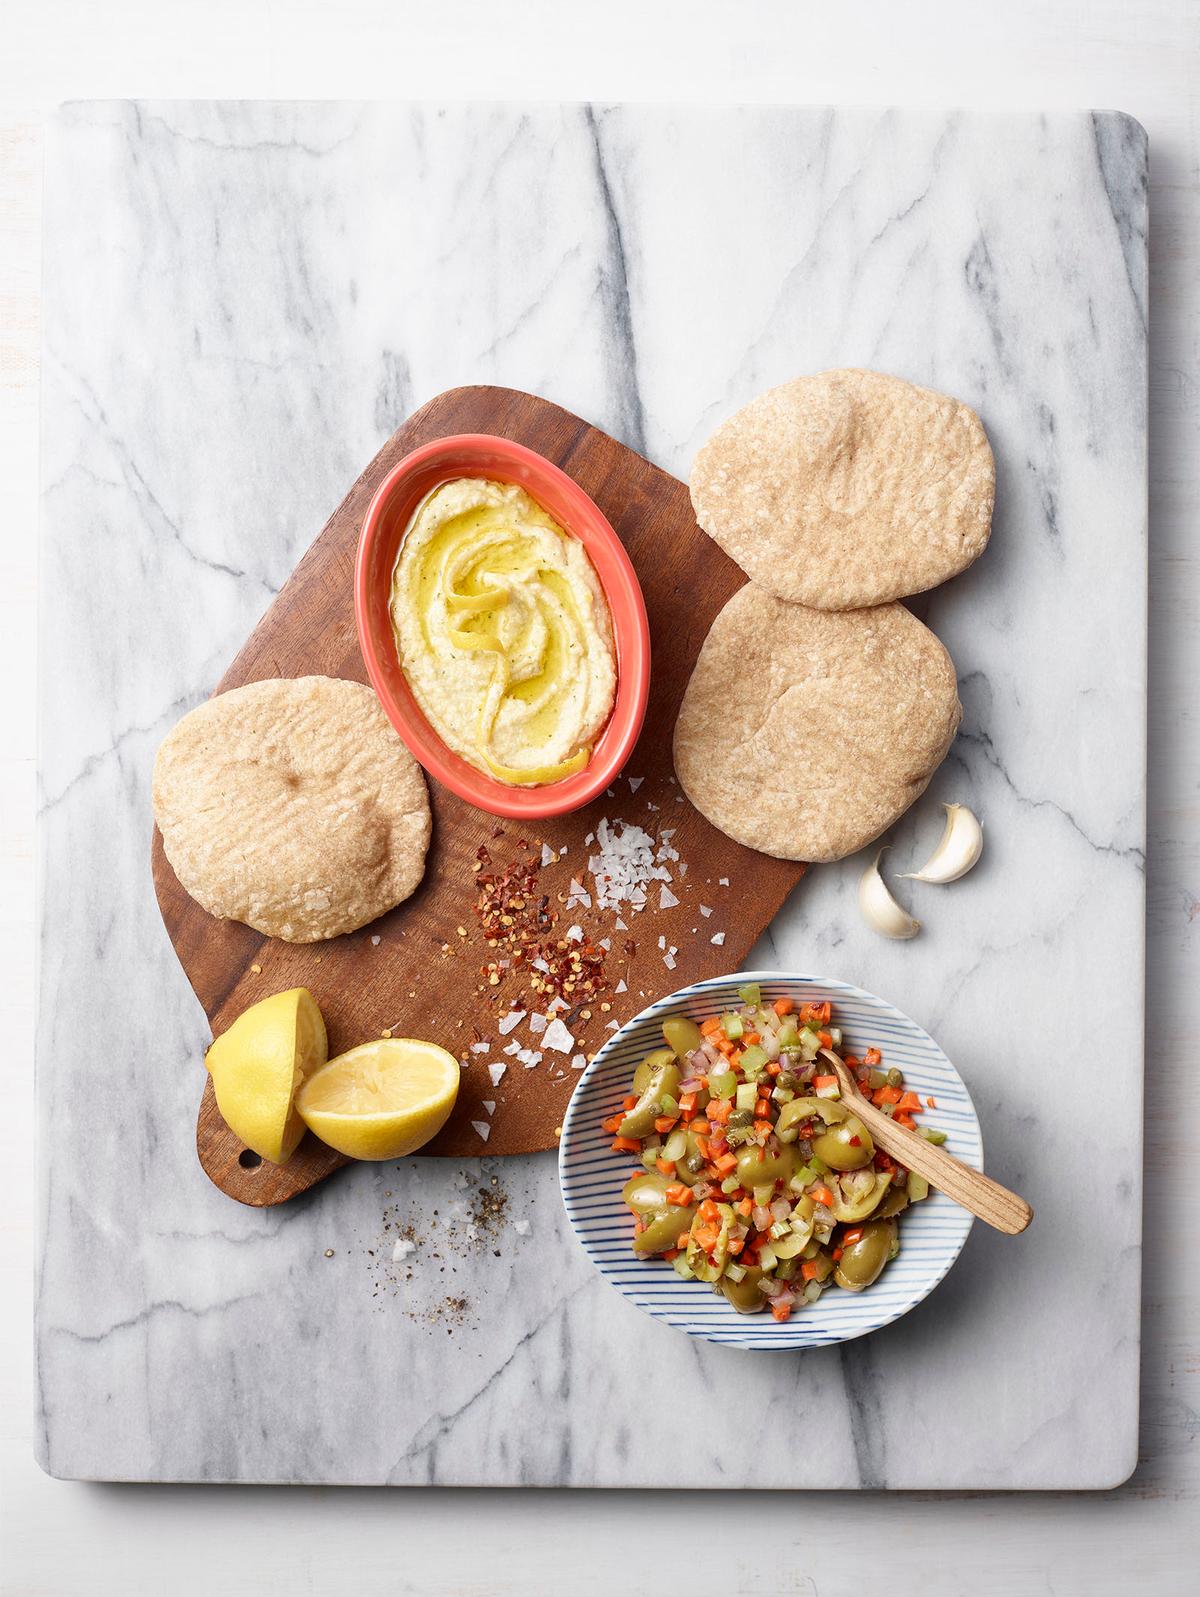 Serve this trio on its own for a lighter spread or to accompany grilled meats and fish, cheese and cold cuts, and other warm weather favorites. (Photo from “The Mediterranean Diabetes Cookbook, 2nd Edition”)